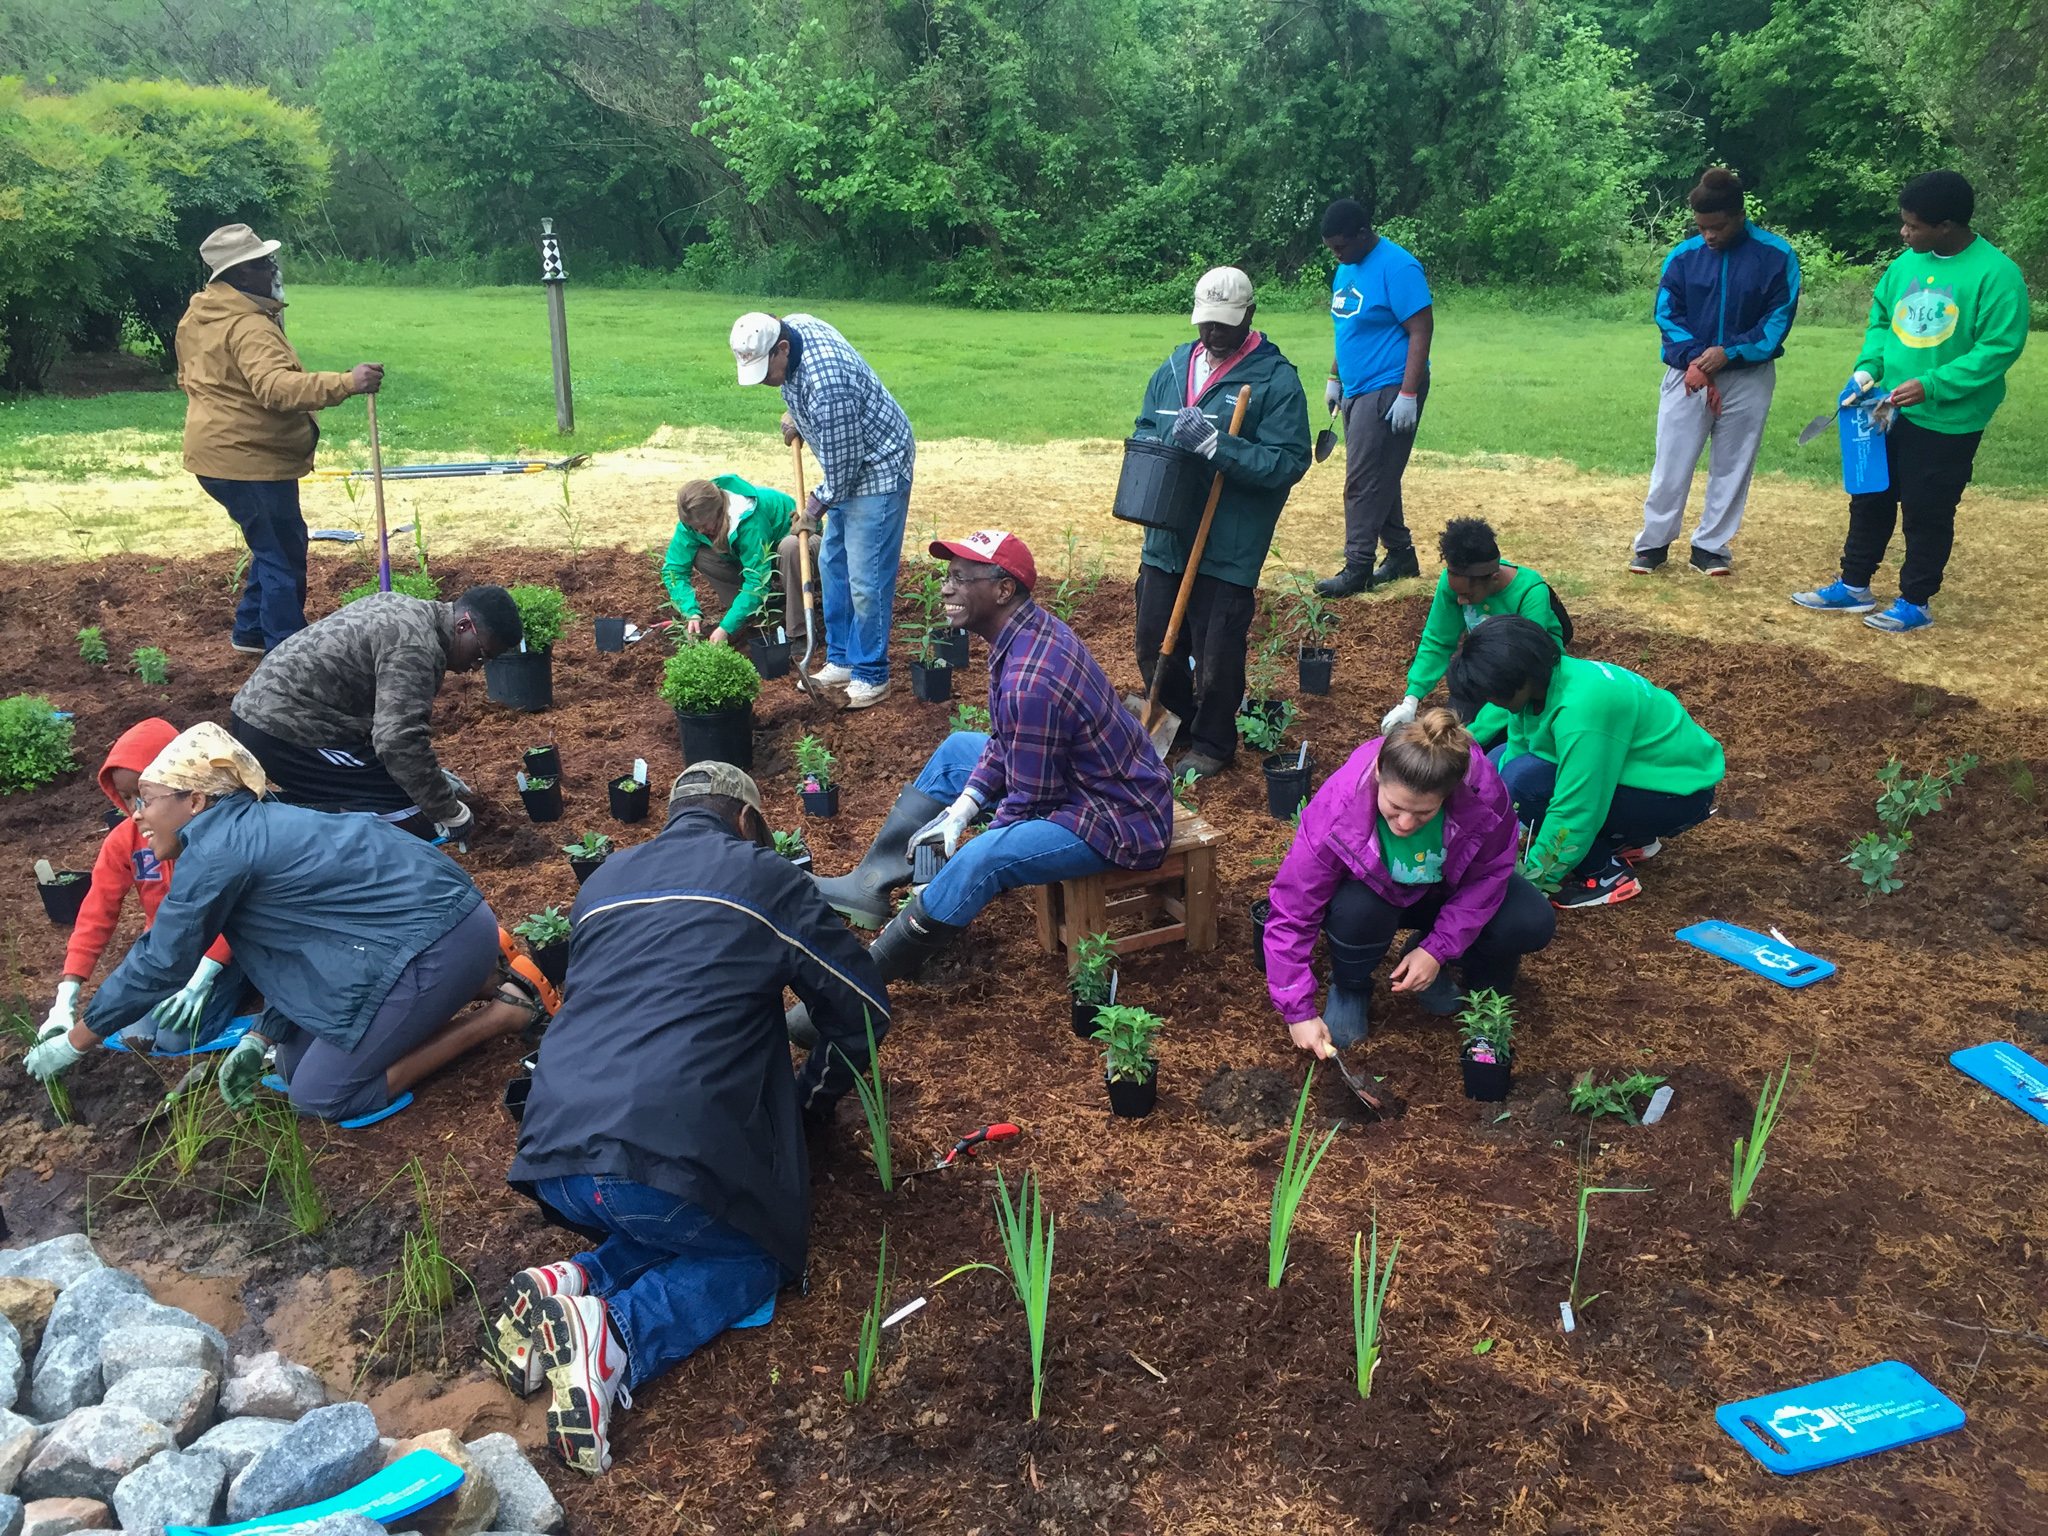 Fellows at St. Ambrose Church helping to plant the new rain garden | Photo by Peter Raabe